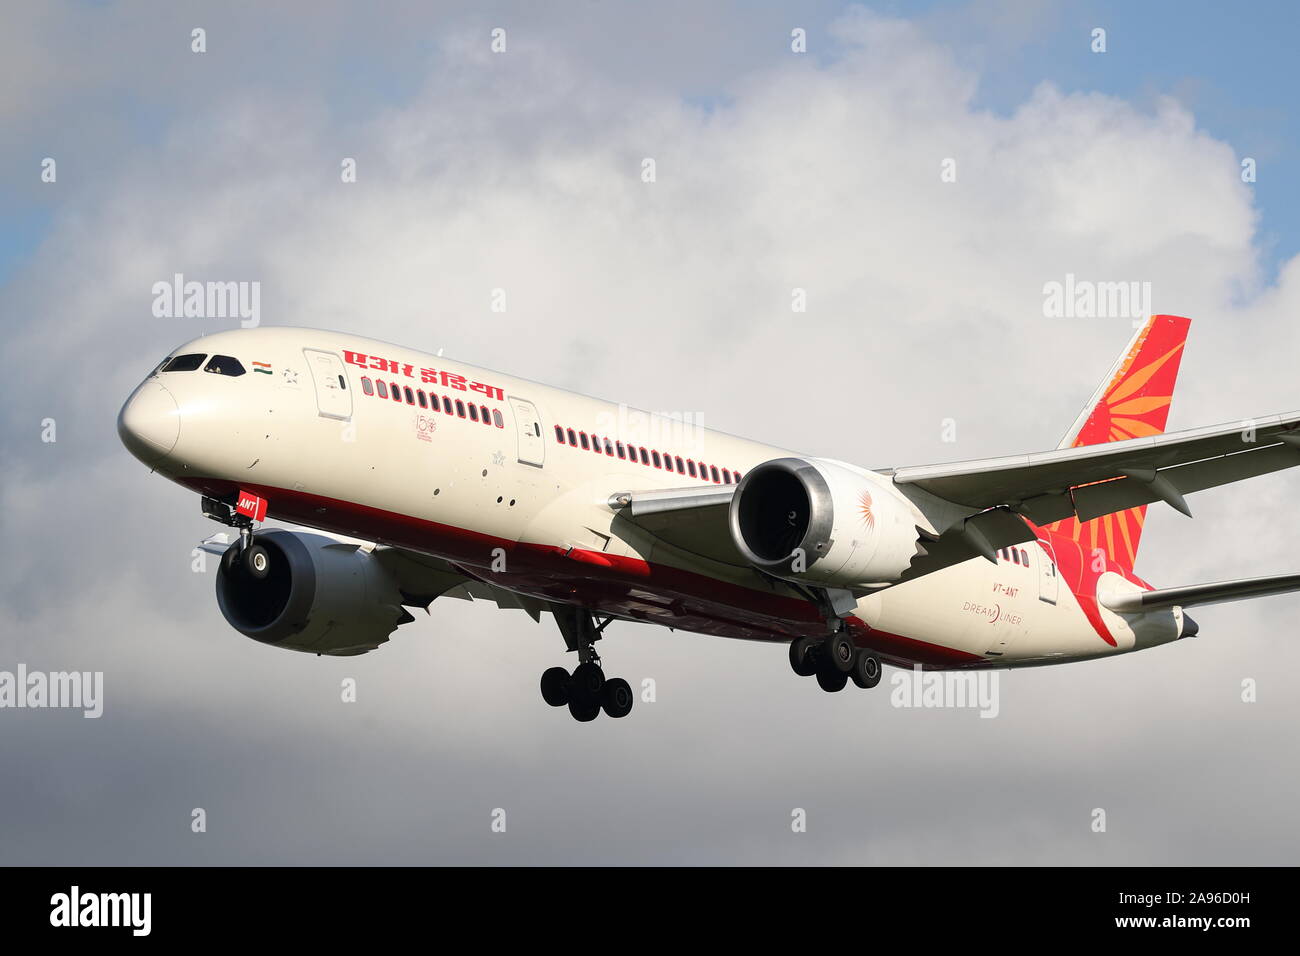 Air India Boeing 787-8 Dreamliner VT-ANT departing from London Heathrow Airport, UK Stock Photo